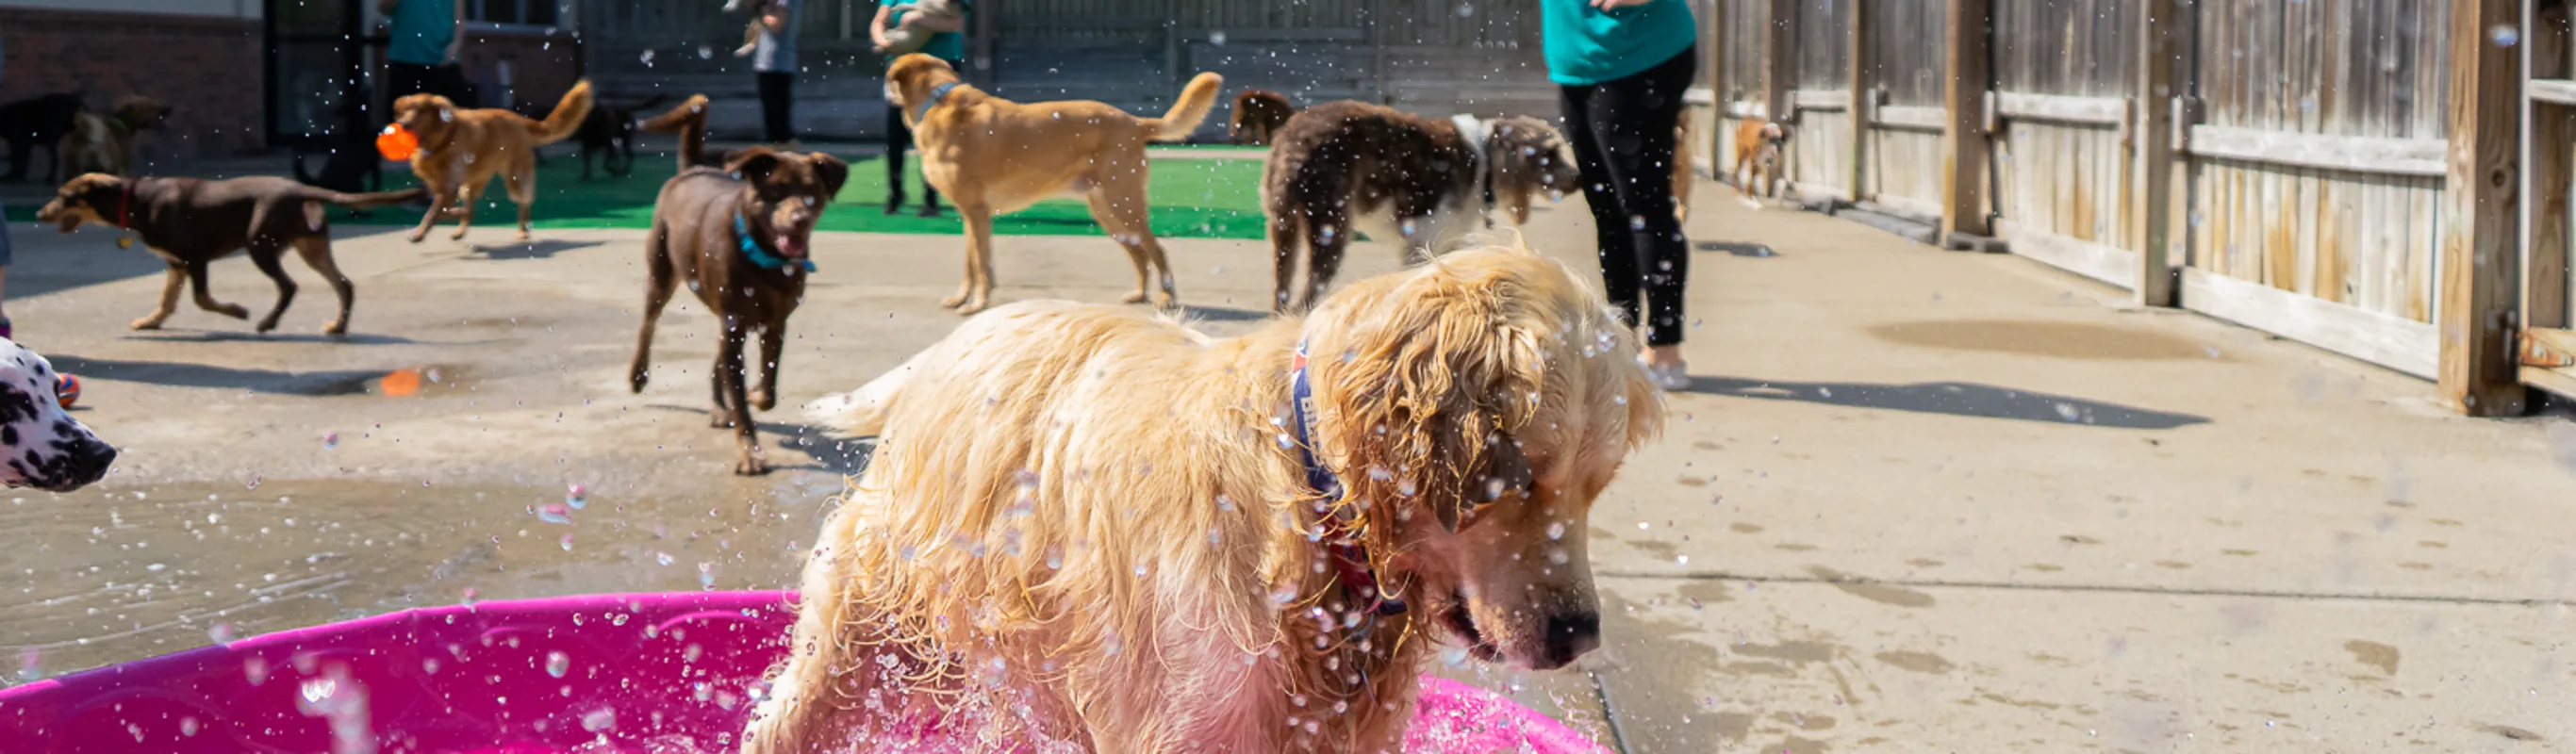 Dog playing in pool at Puppy Playground